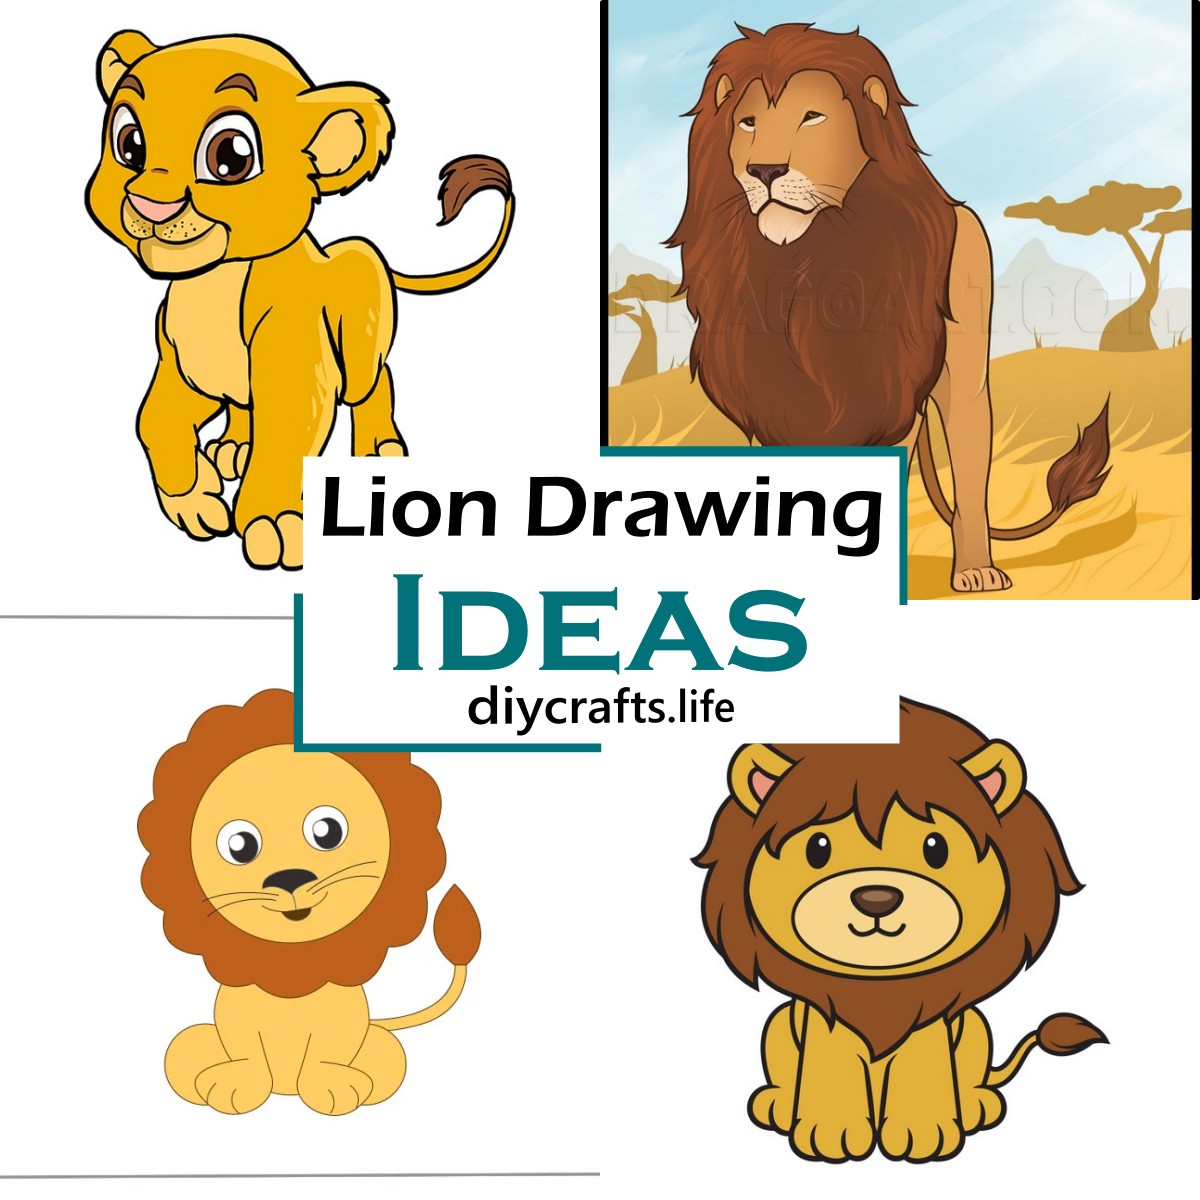 Illustration of a friendly lion on a coloring page for kids on Craiyon-saigonsouth.com.vn